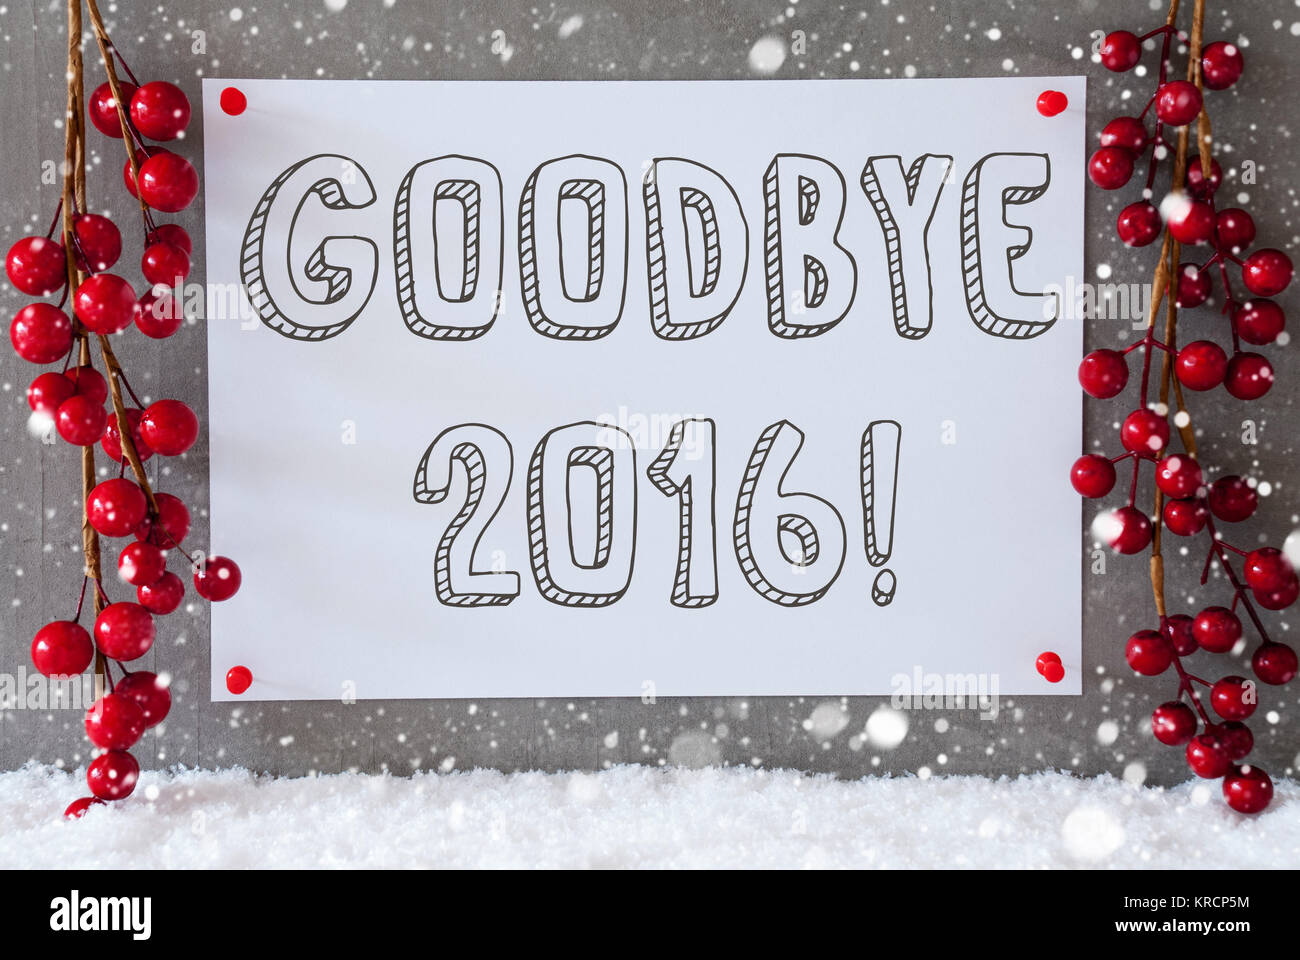 Label With English Text Goodbye 2016 For Happy New Year. Red Christmas Decoration On Snow. Urban And Modern Cement Wall As Background With Snowflakes. Stock Photo